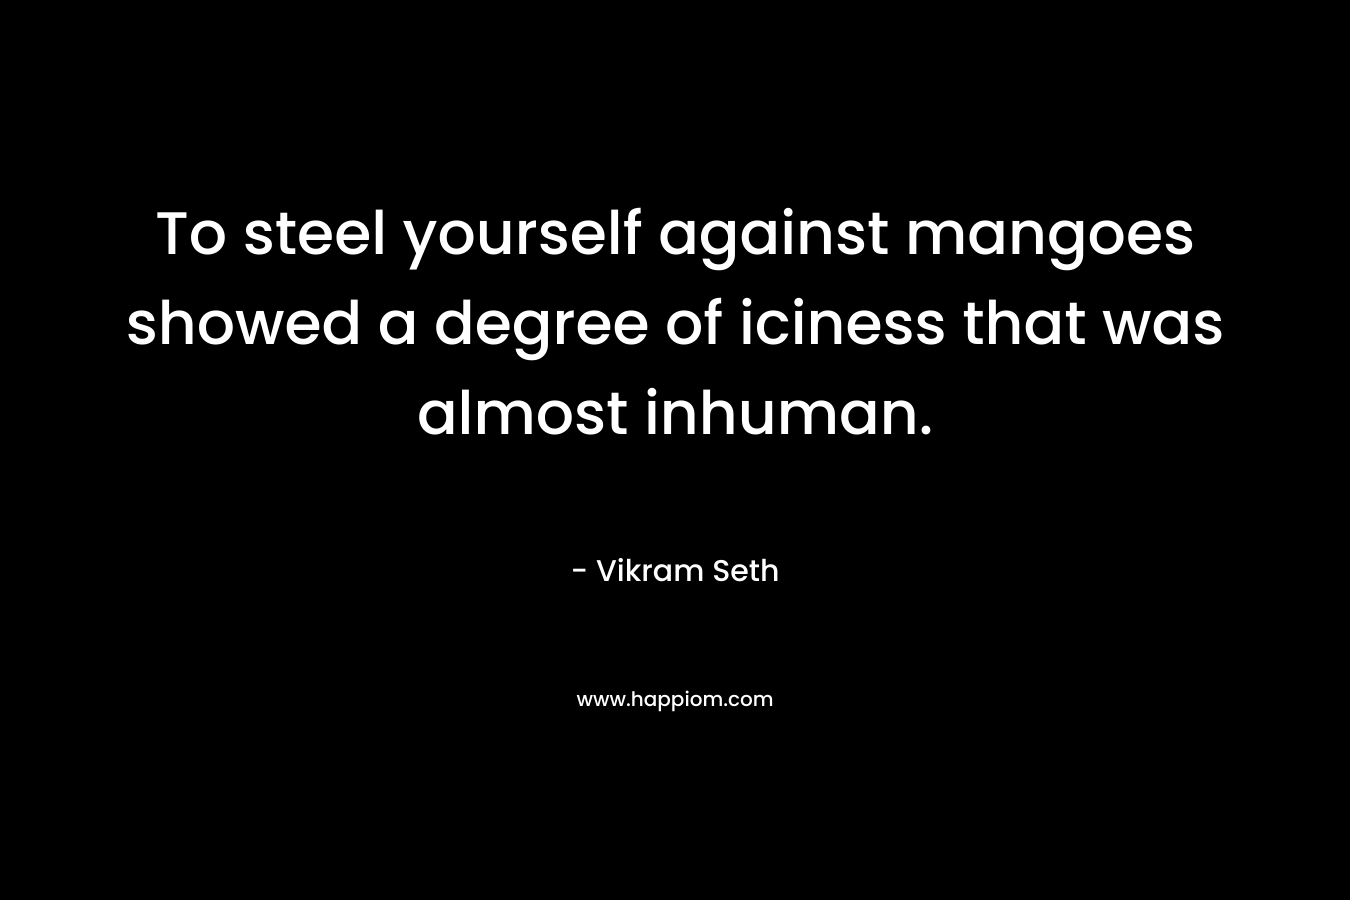 To steel yourself against mangoes showed a degree of iciness that was almost inhuman.